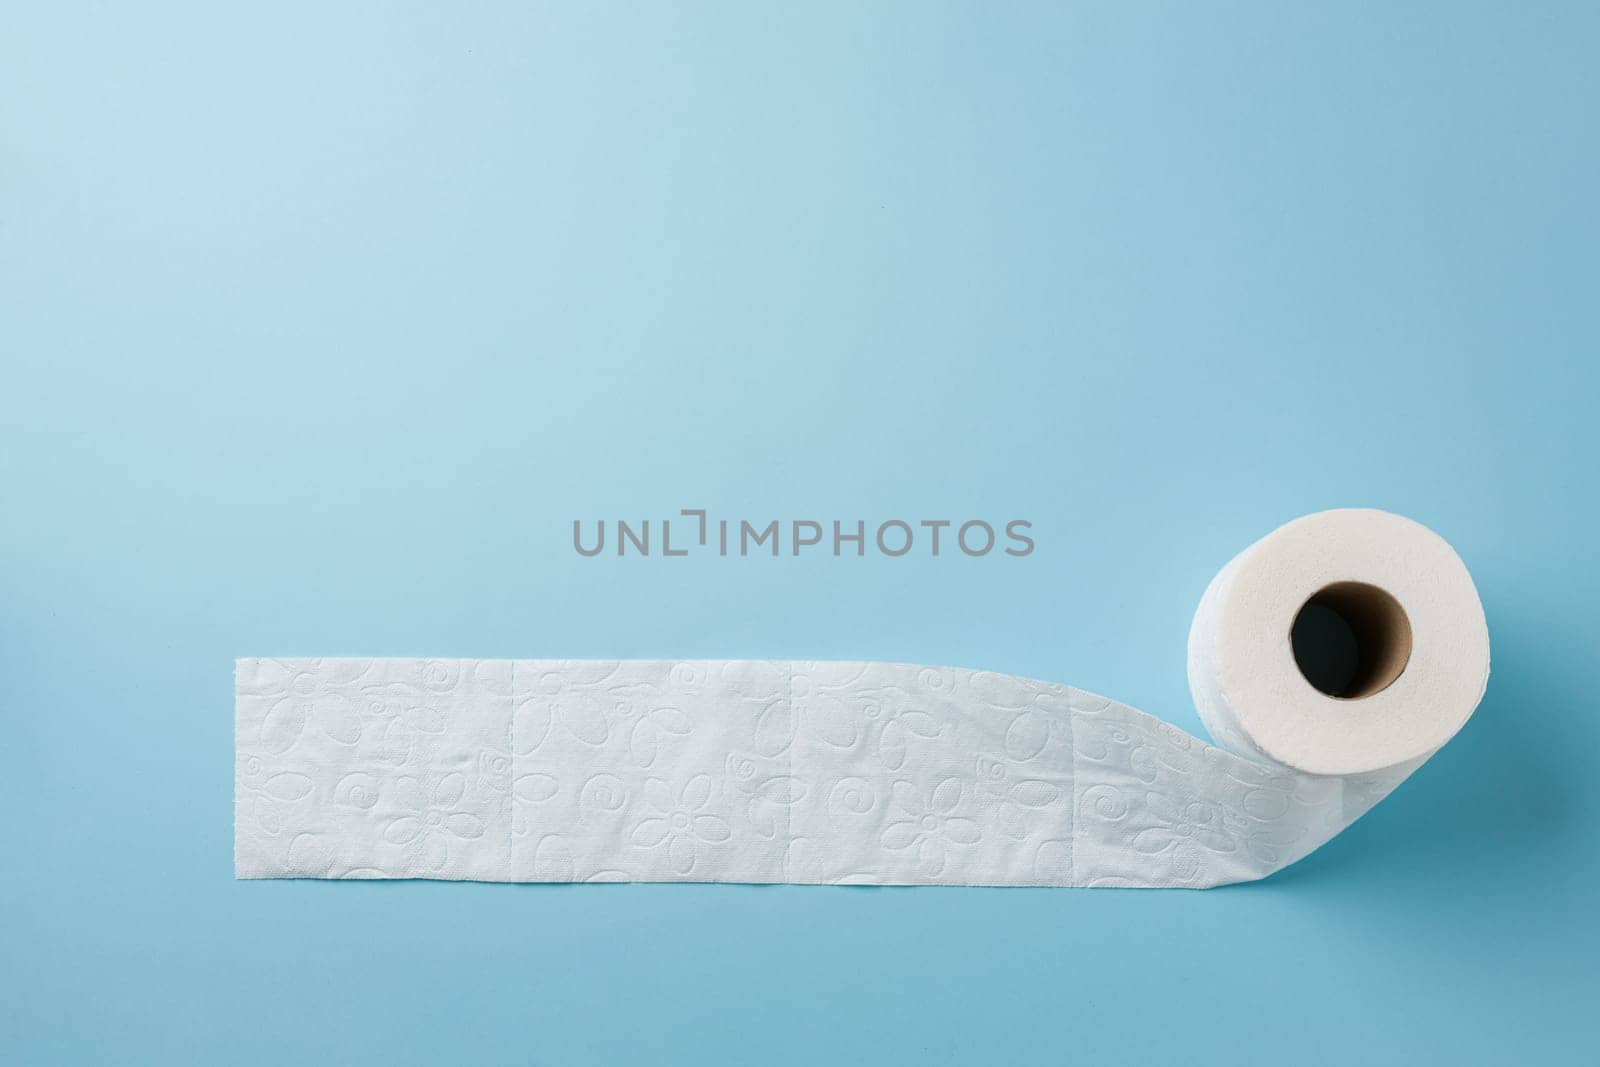 Top view of toilet paper roll on blue background by Sonat